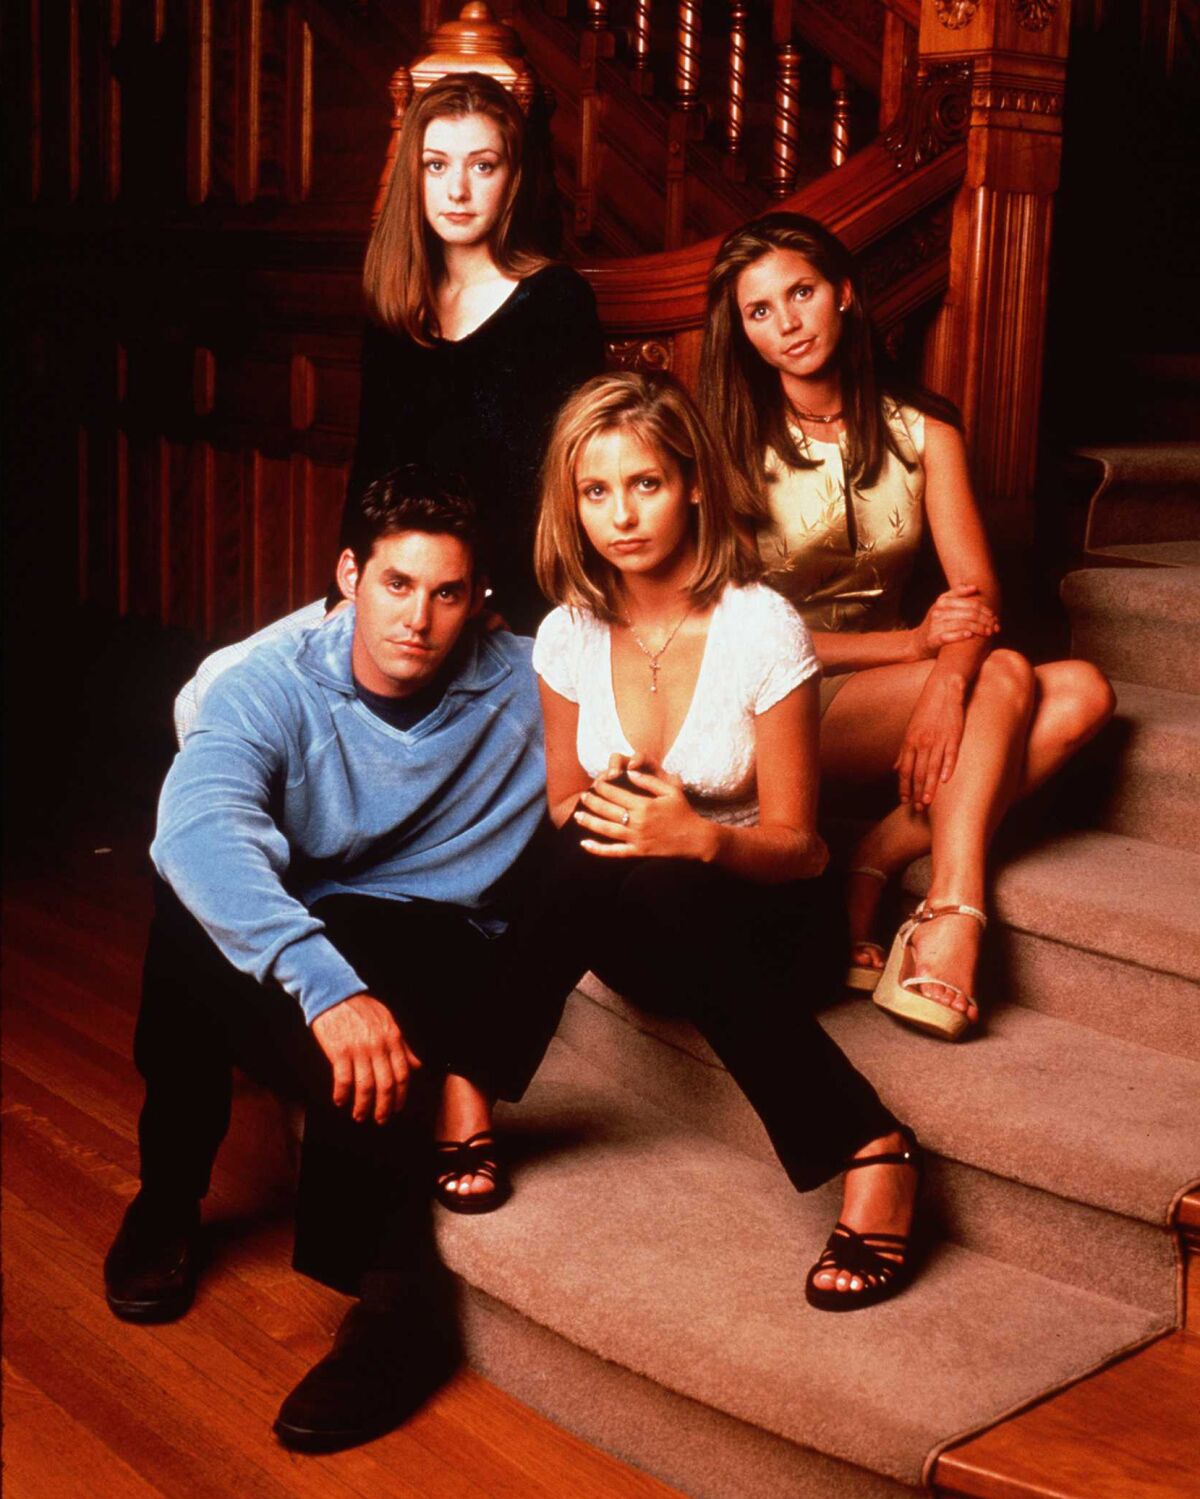 The cast of "Buffy the Vampire Slayer."